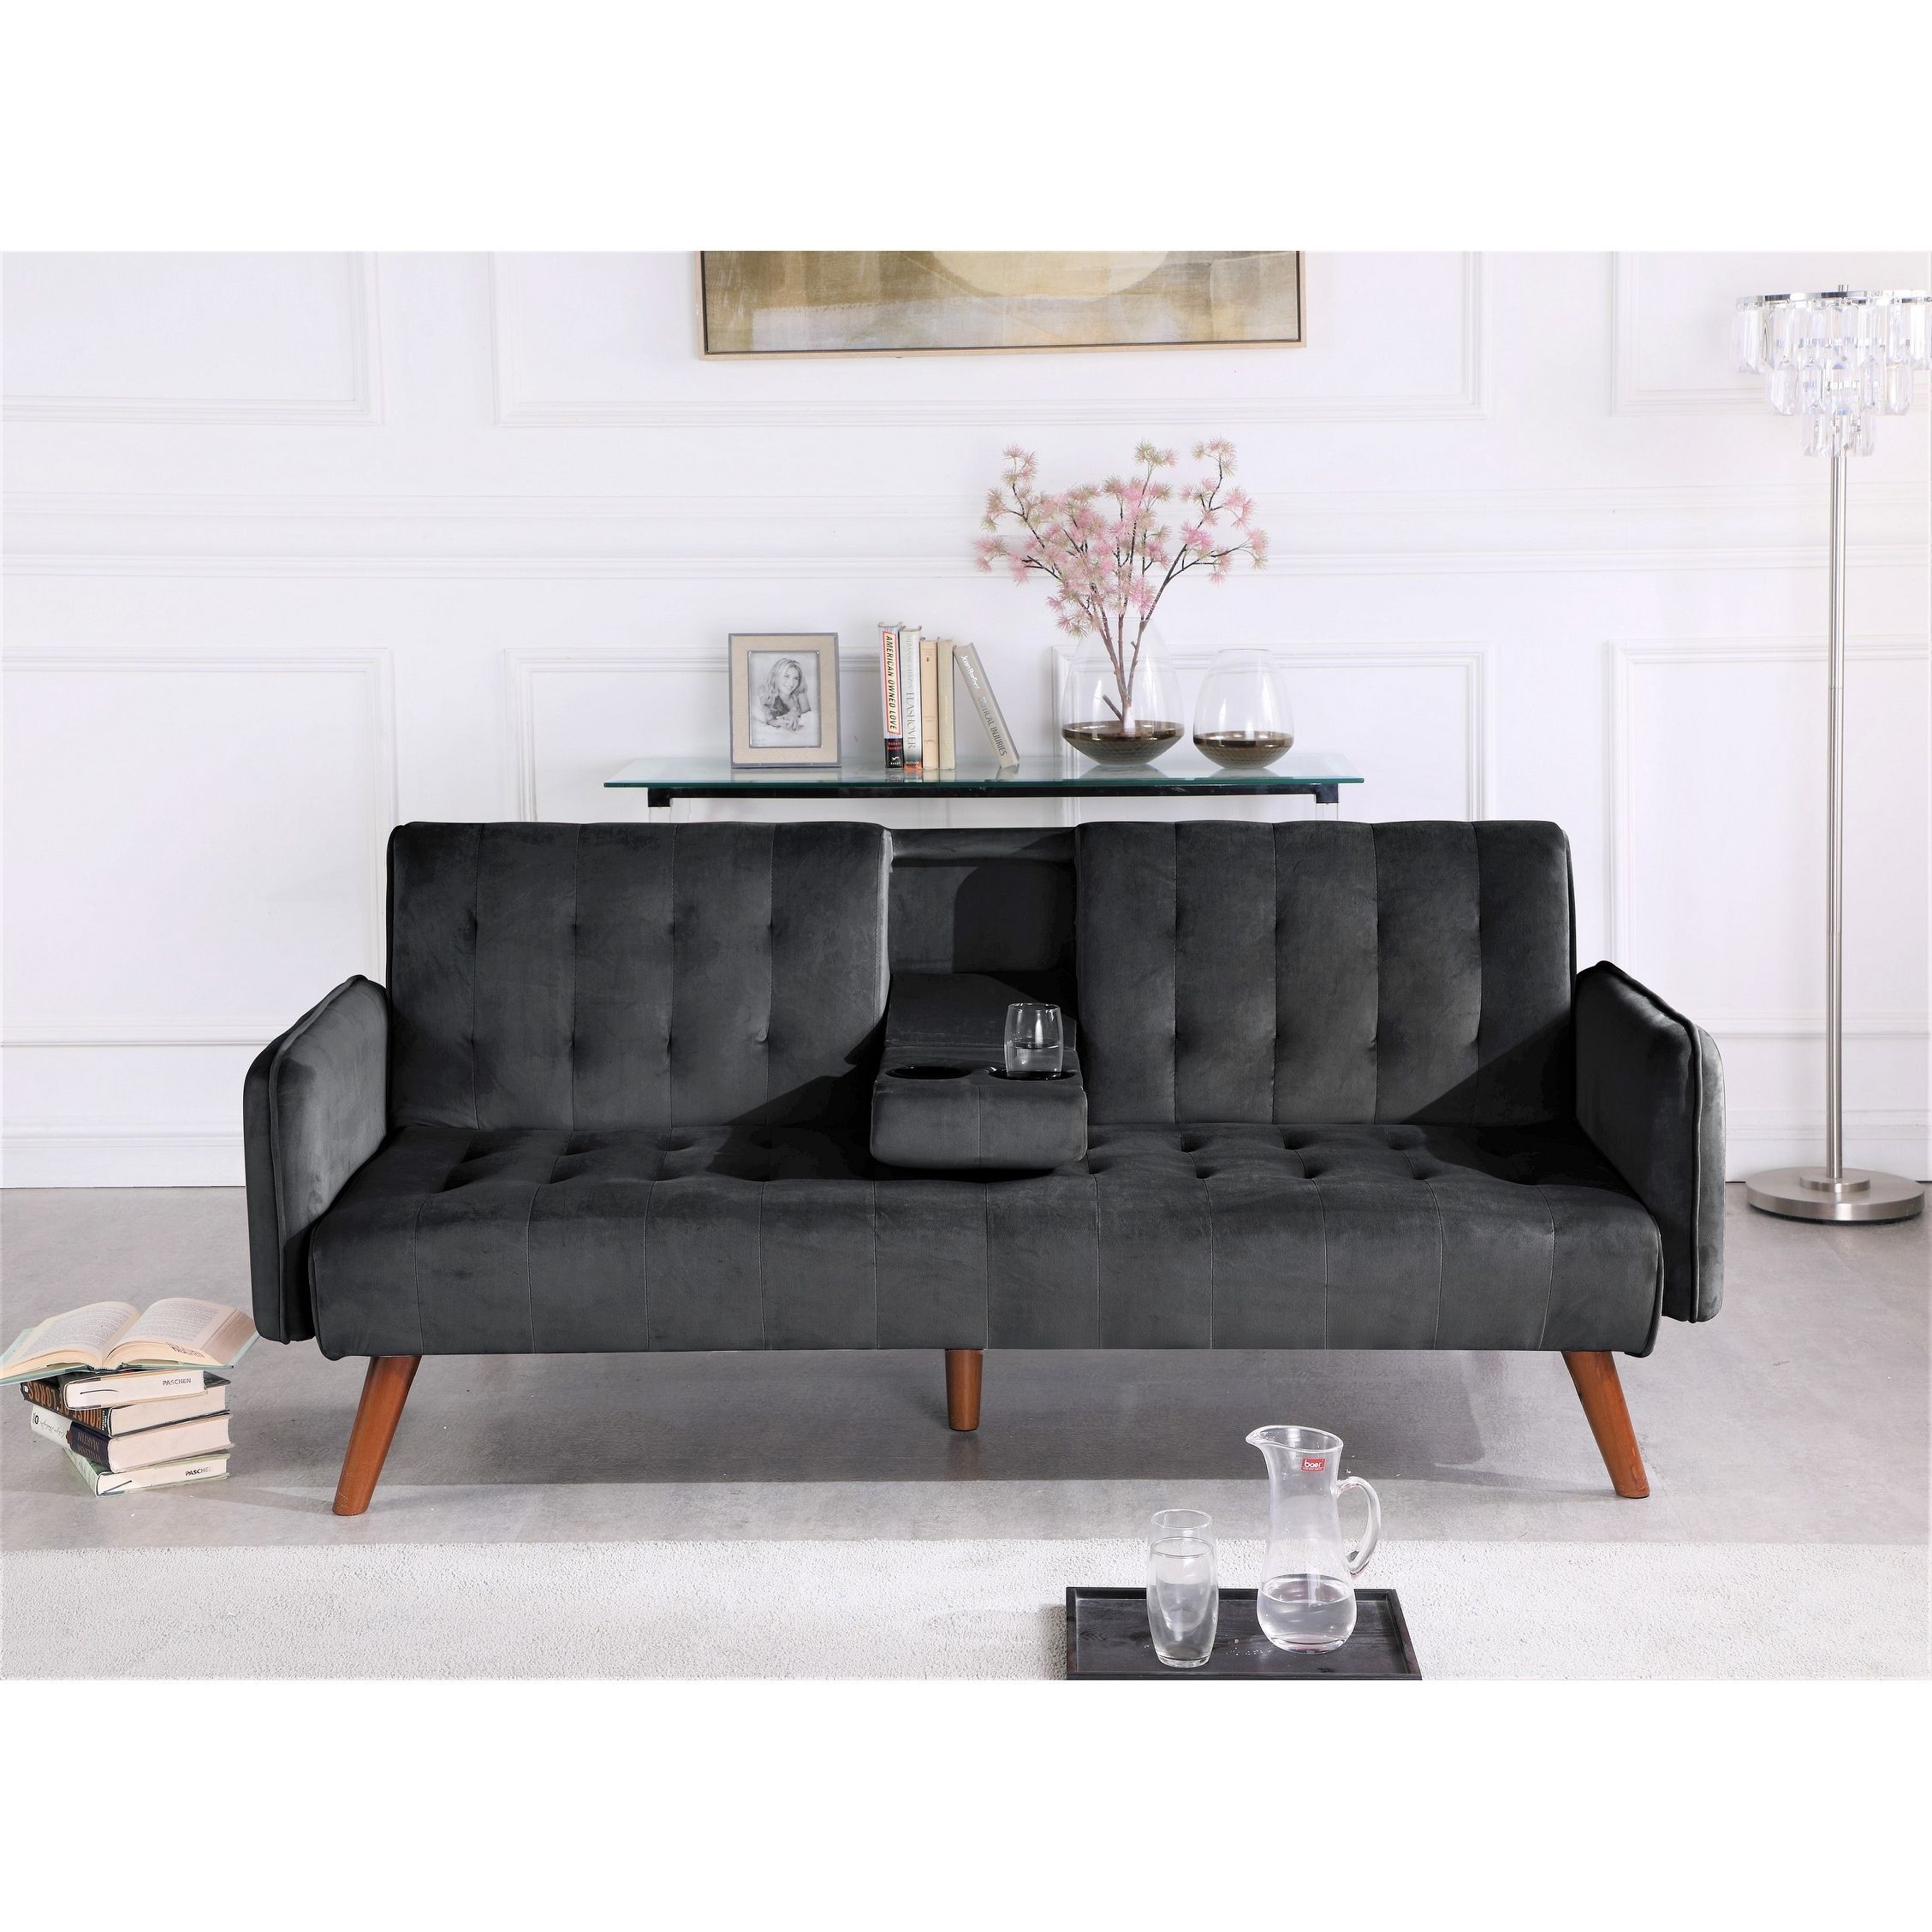 Us Pride Tufted Convertible Velvet Sofa Bed With Cup Holder – Overstock With 66" Convertible Velvet Sofa Beds (Gallery 10 of 20)